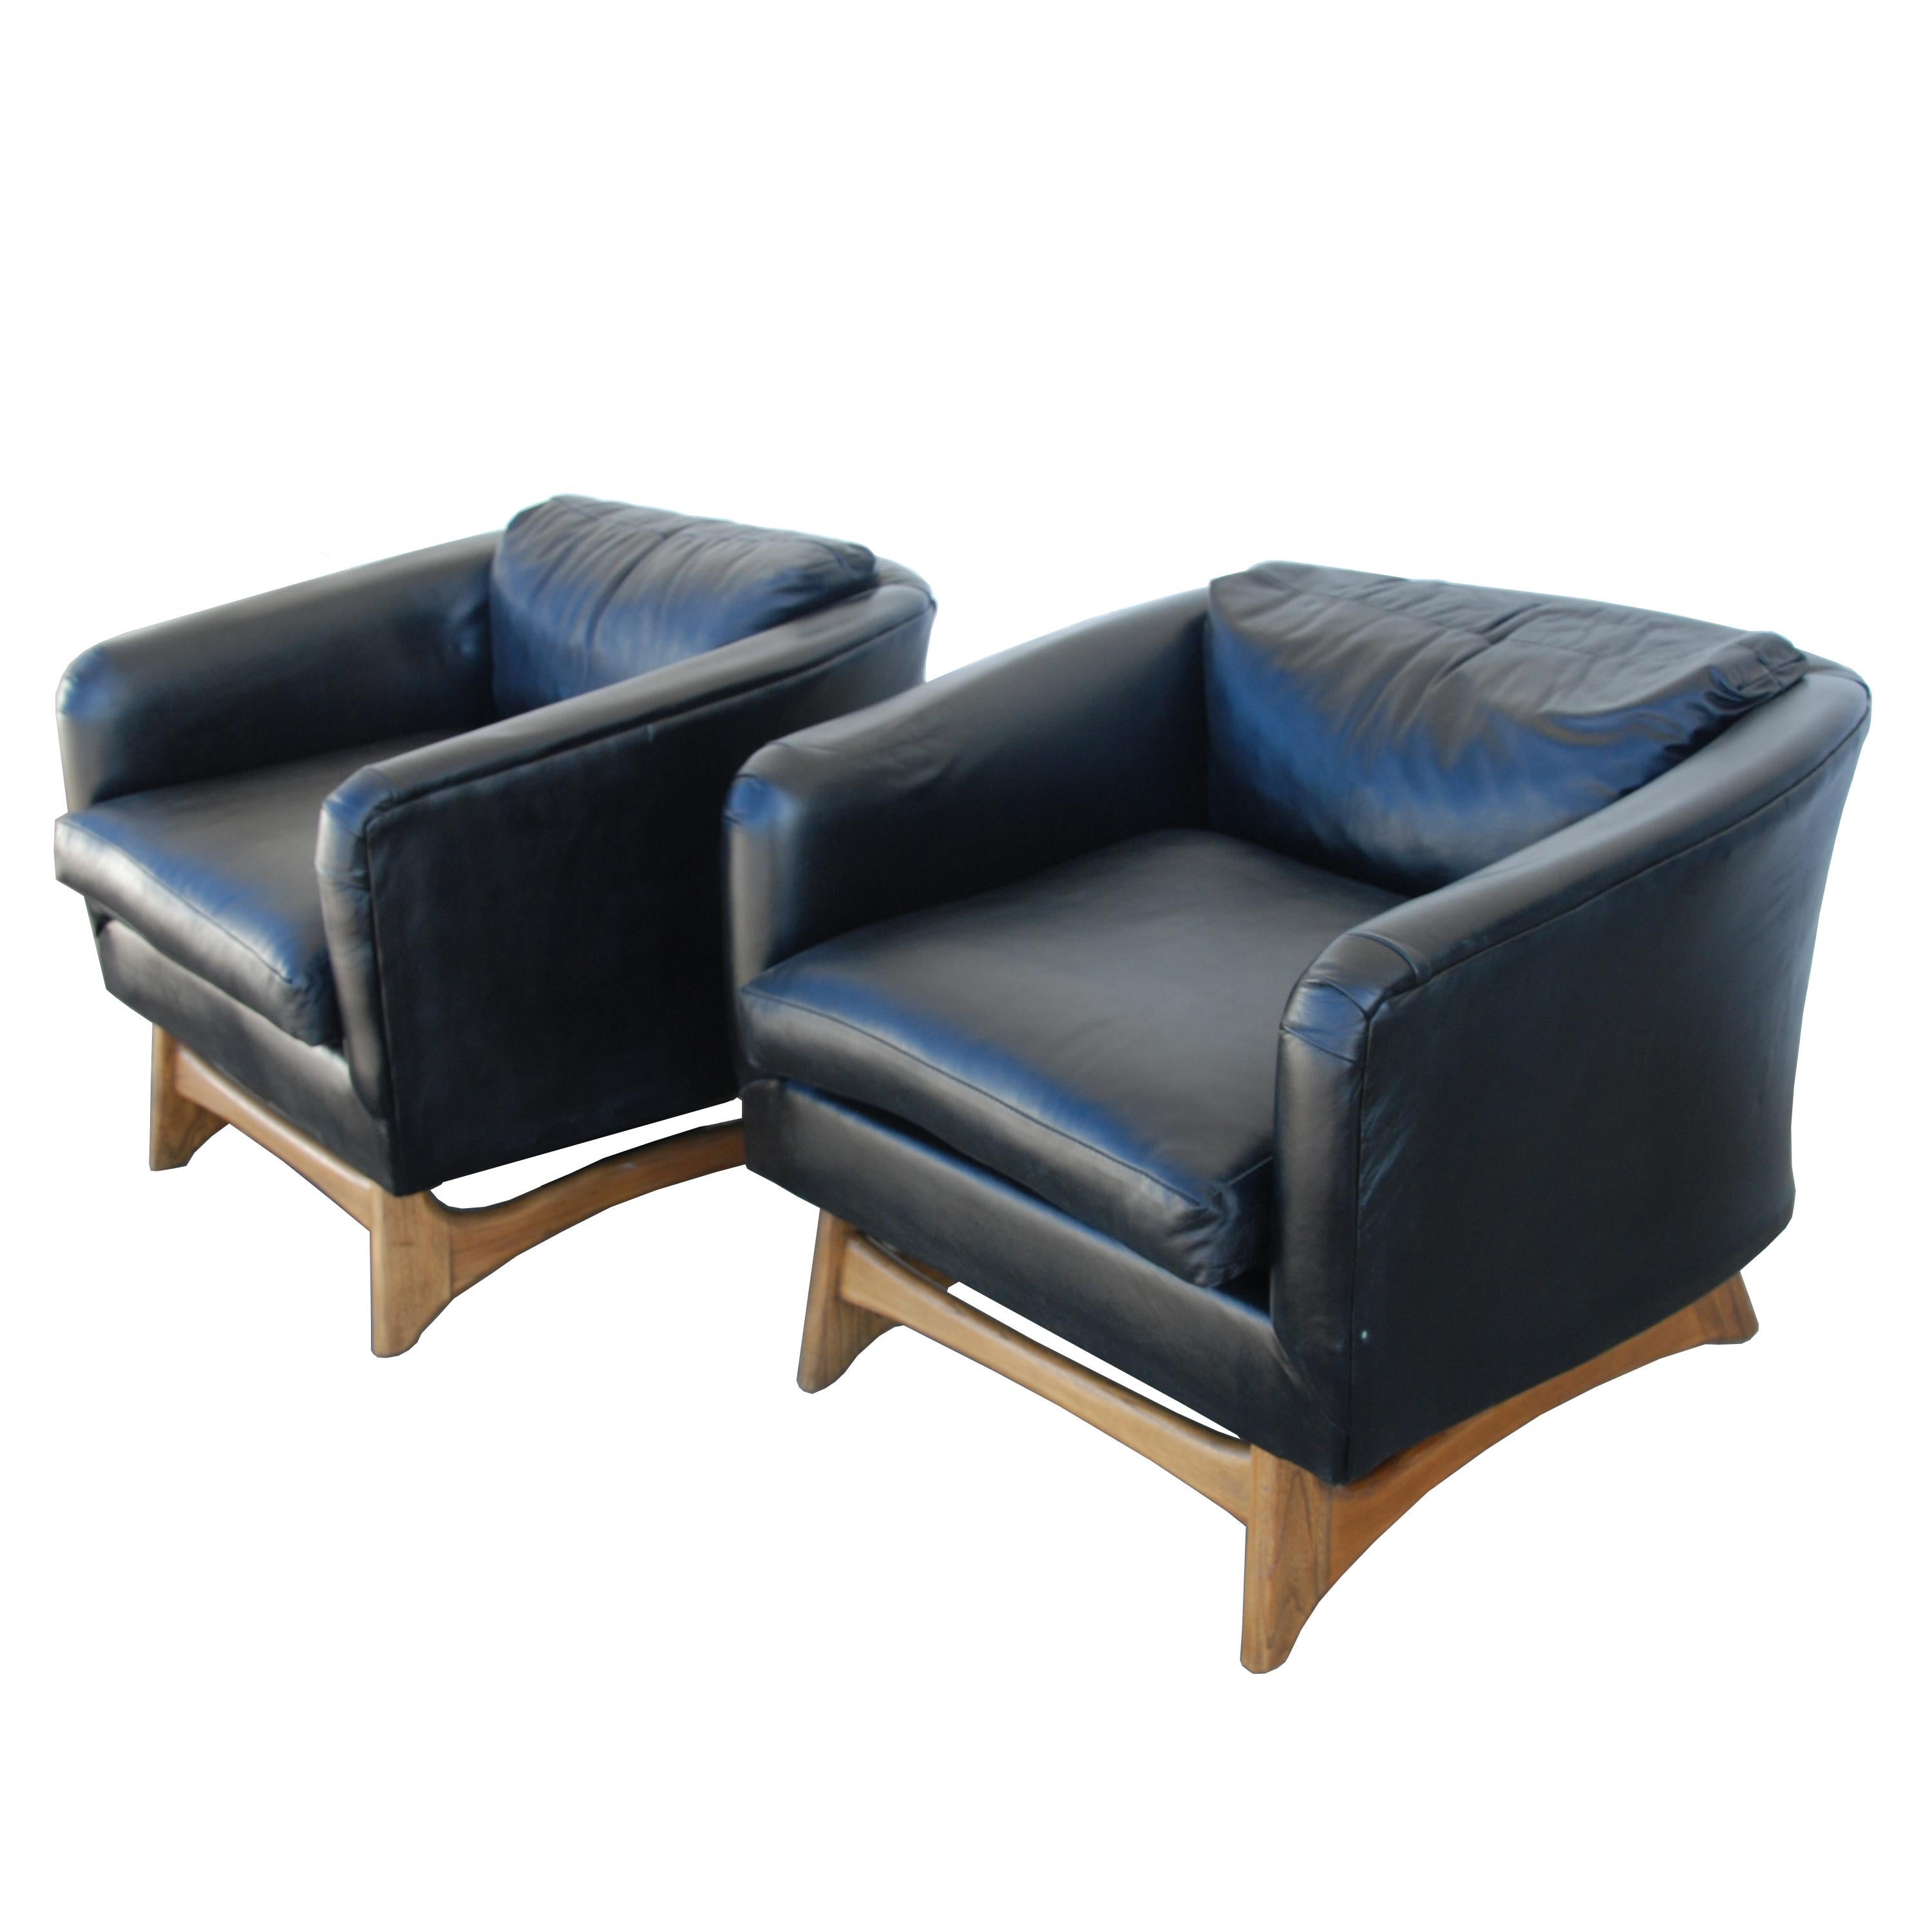 American Pair of Adrian Pearsall for Craft Associates Lounge Chairs For Sale